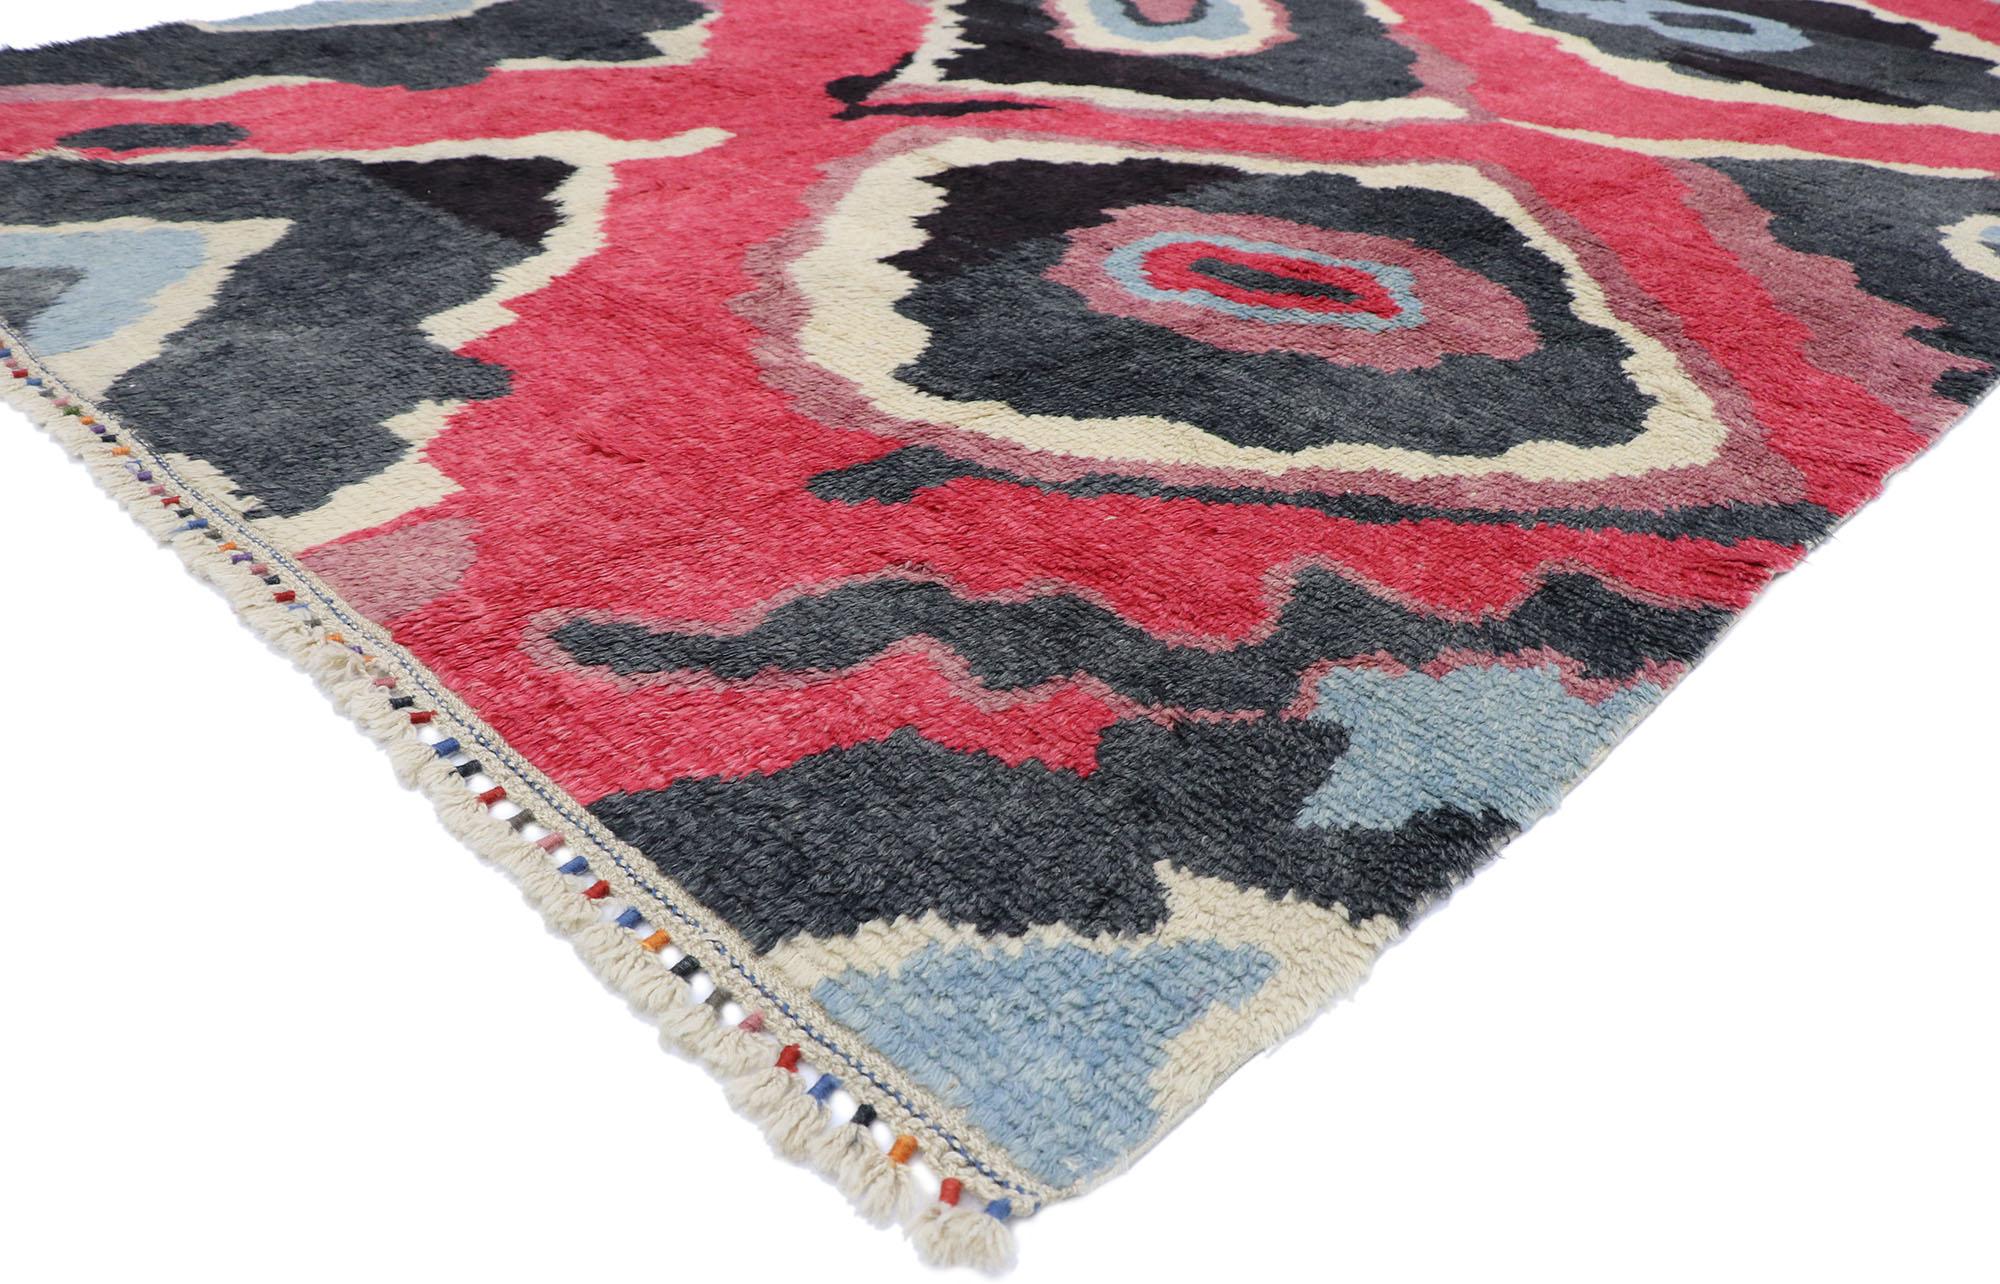 51872, new colorful contemporary Tulu Shag Area rug Inspired by Sonia Delaunay. This hand knotted wool contemporary Tulu shag area rug with Postmodern style showcases an all-over adventurous geometric pattern composed of ambiguous organic shapes in